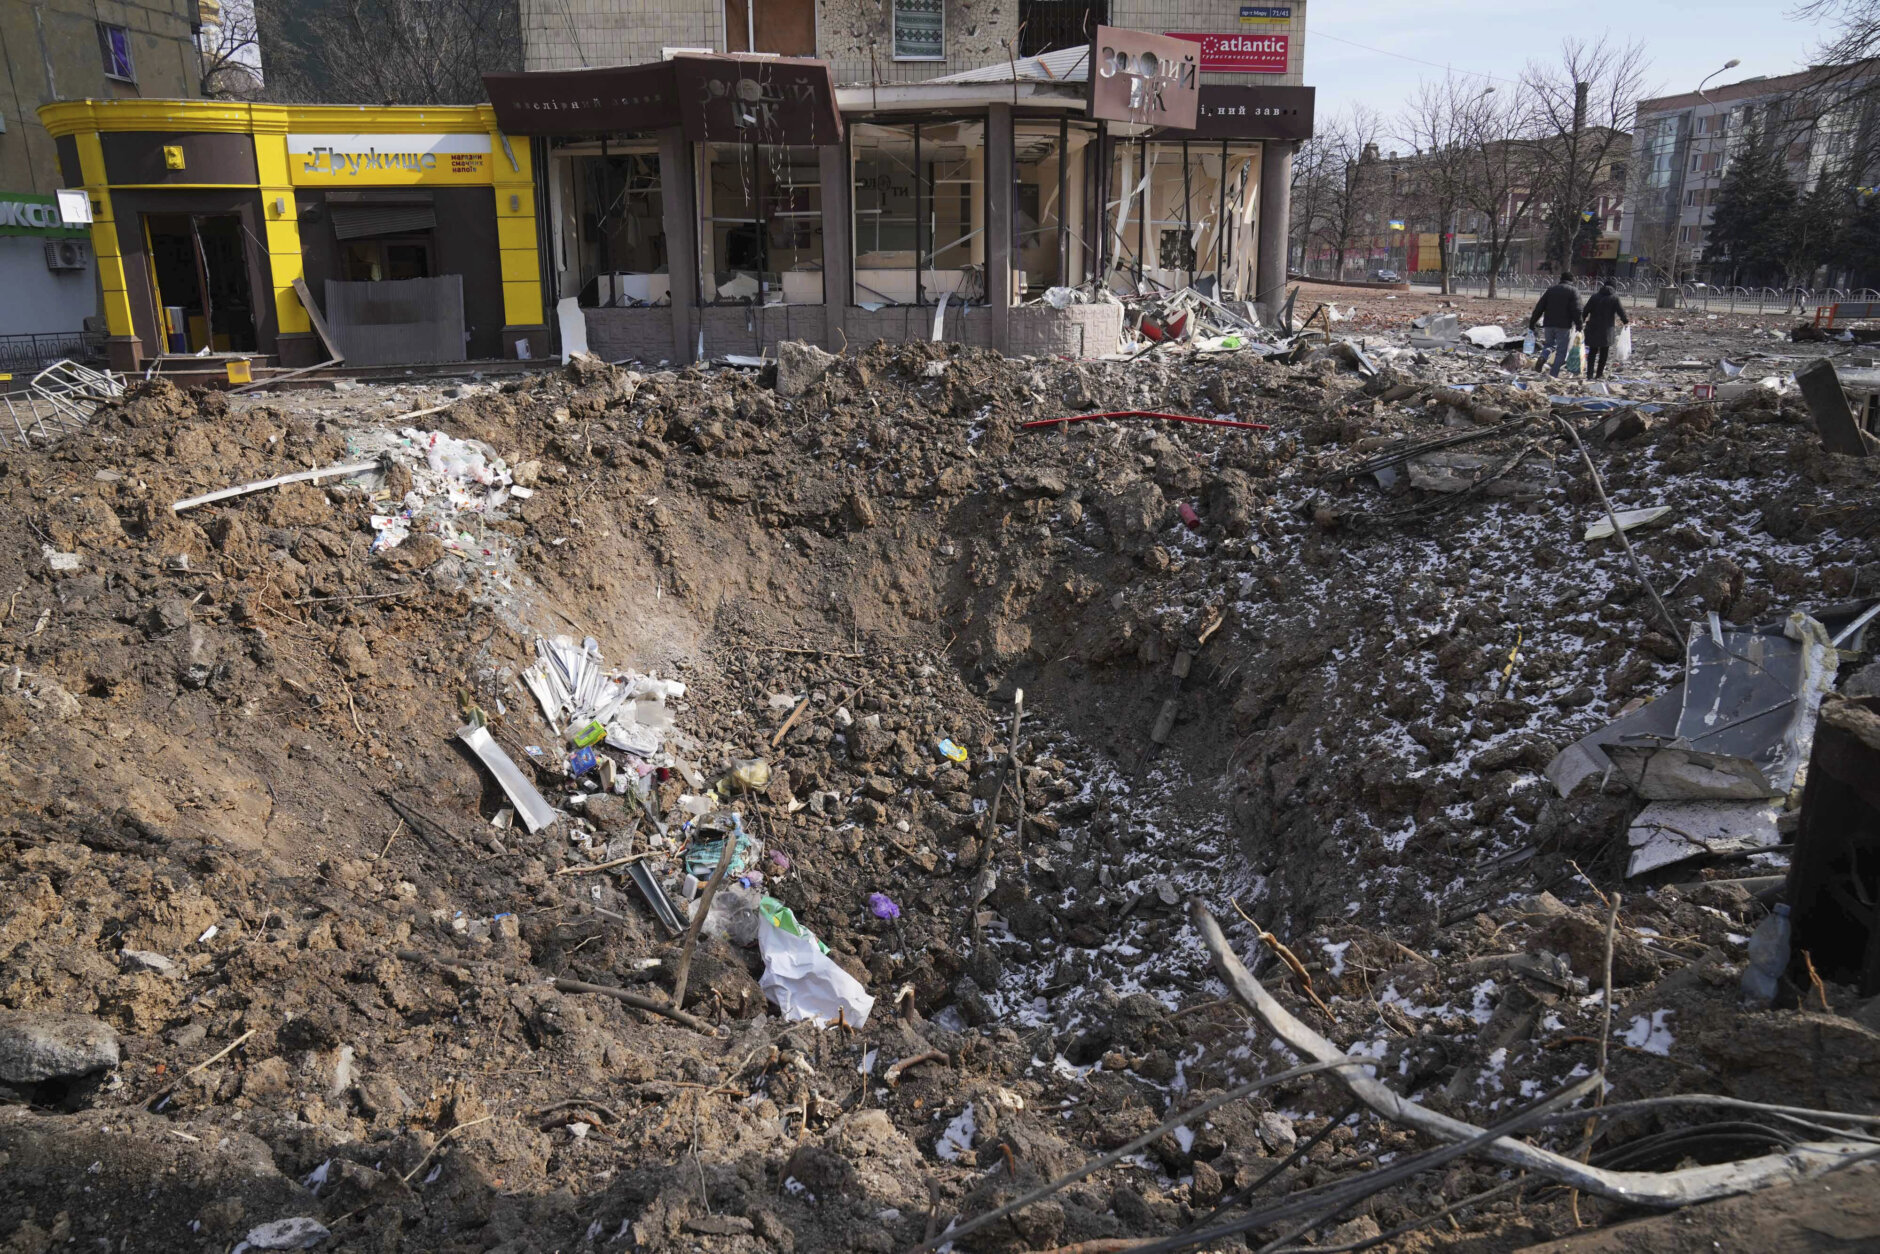 <p>People walk past a crater from the explosion in Mira Avenue (Avenue of Peace) in Mariupol, Ukraine, Sunday, March 13, 2022. The surrounded southern city of Mariupol, where the war has produced some of the greatest human suffering, remained cut off despite earlier talks on creating aid or evacuation convoys.</p>
